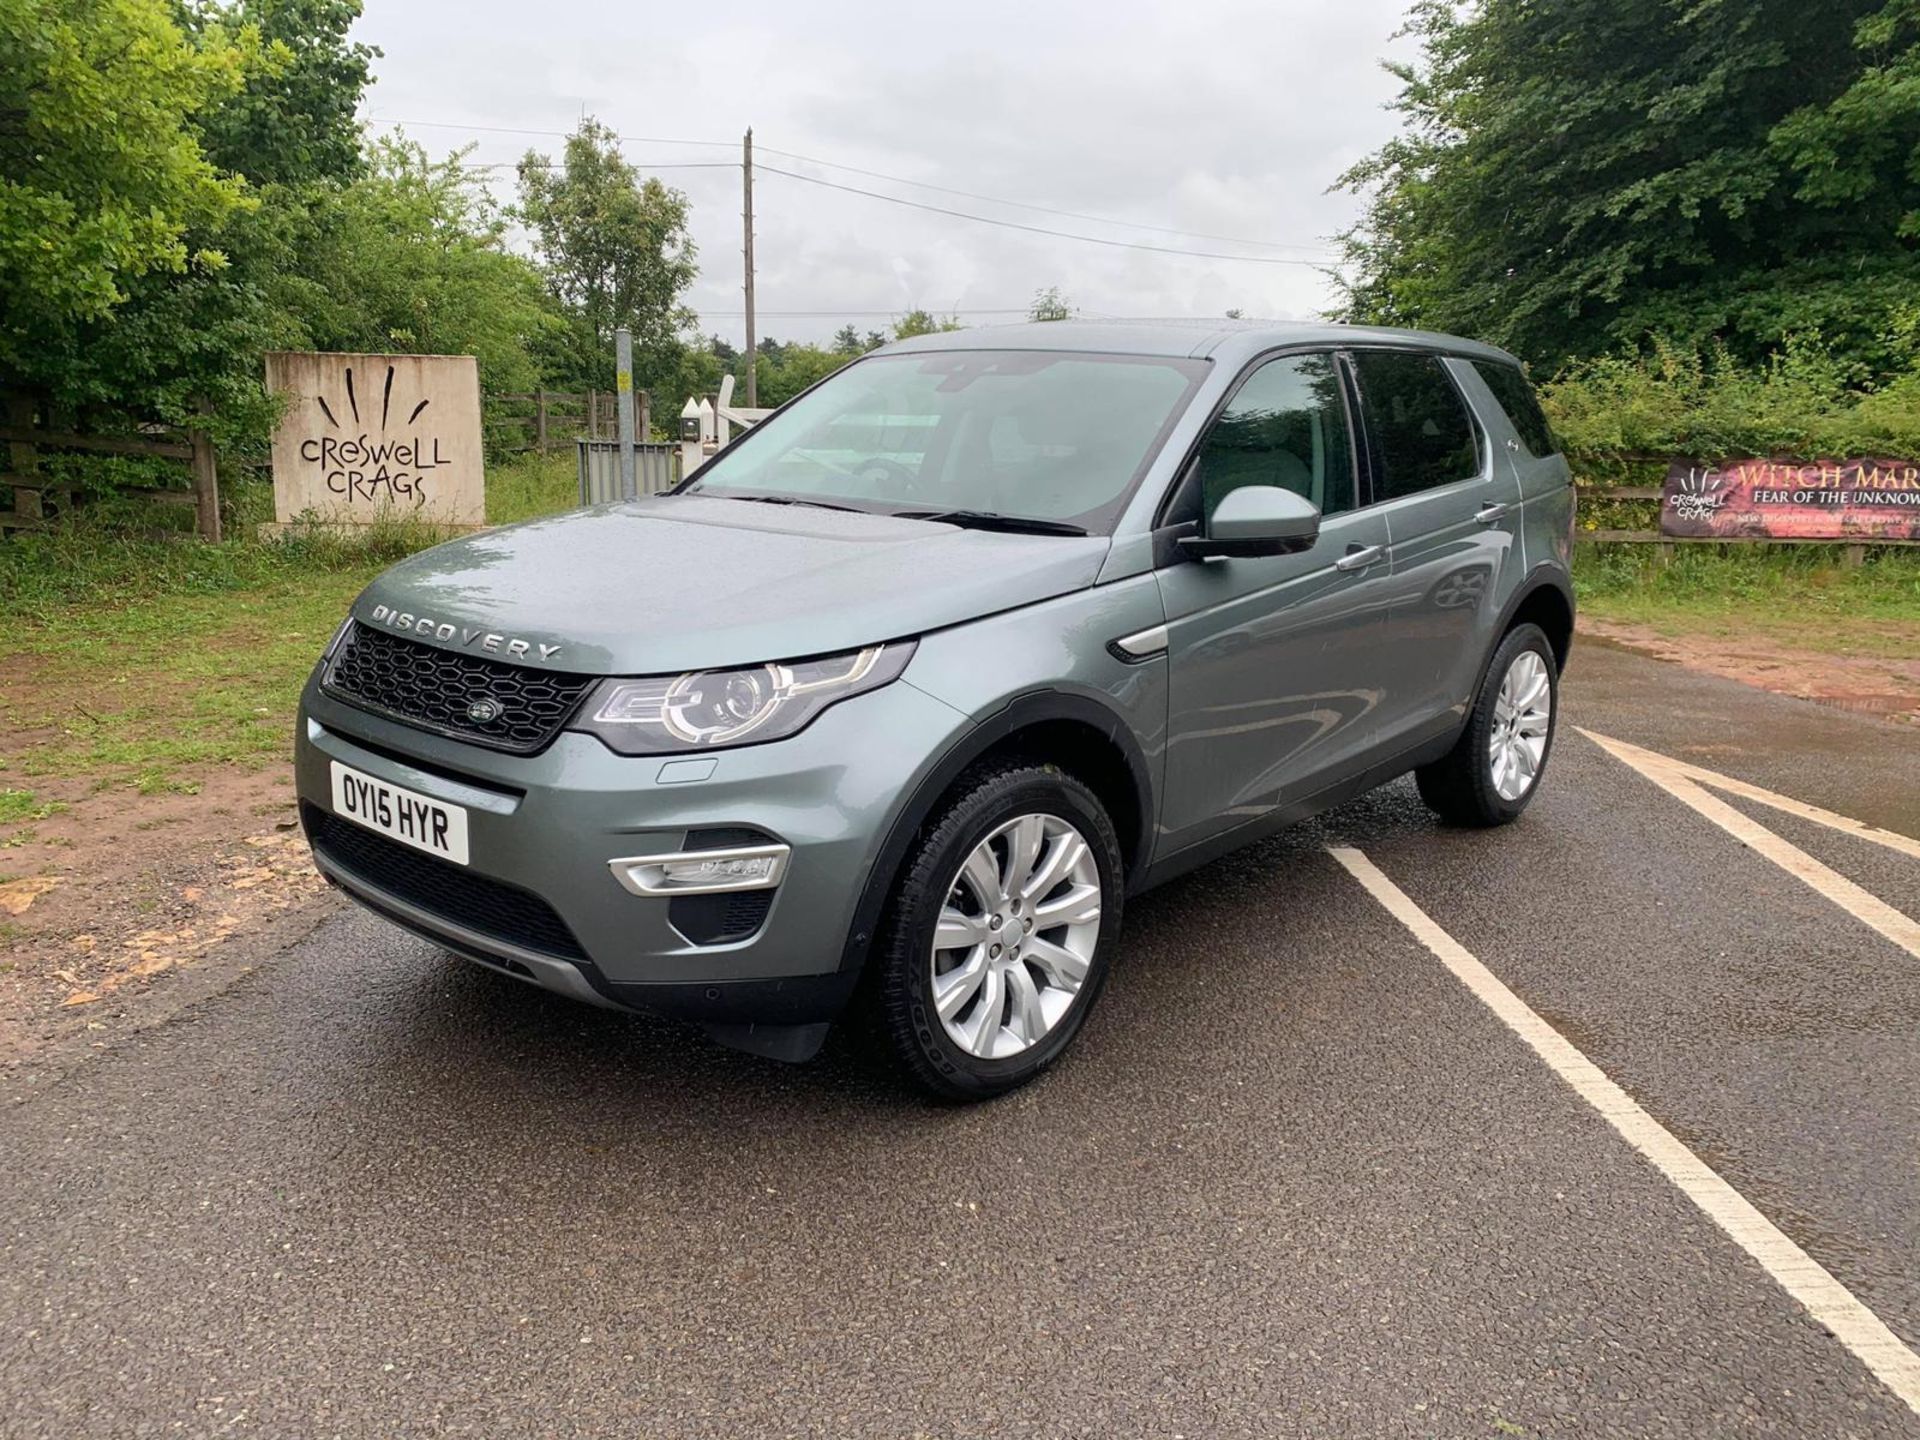 2015/15 REG LAND ROVER DISCOVERY SPORT SD4 HSE LUXURY 2.2 DIESEL AUTOMATIC, SHOWING 2 FORMER KEEPERS - Image 4 of 17